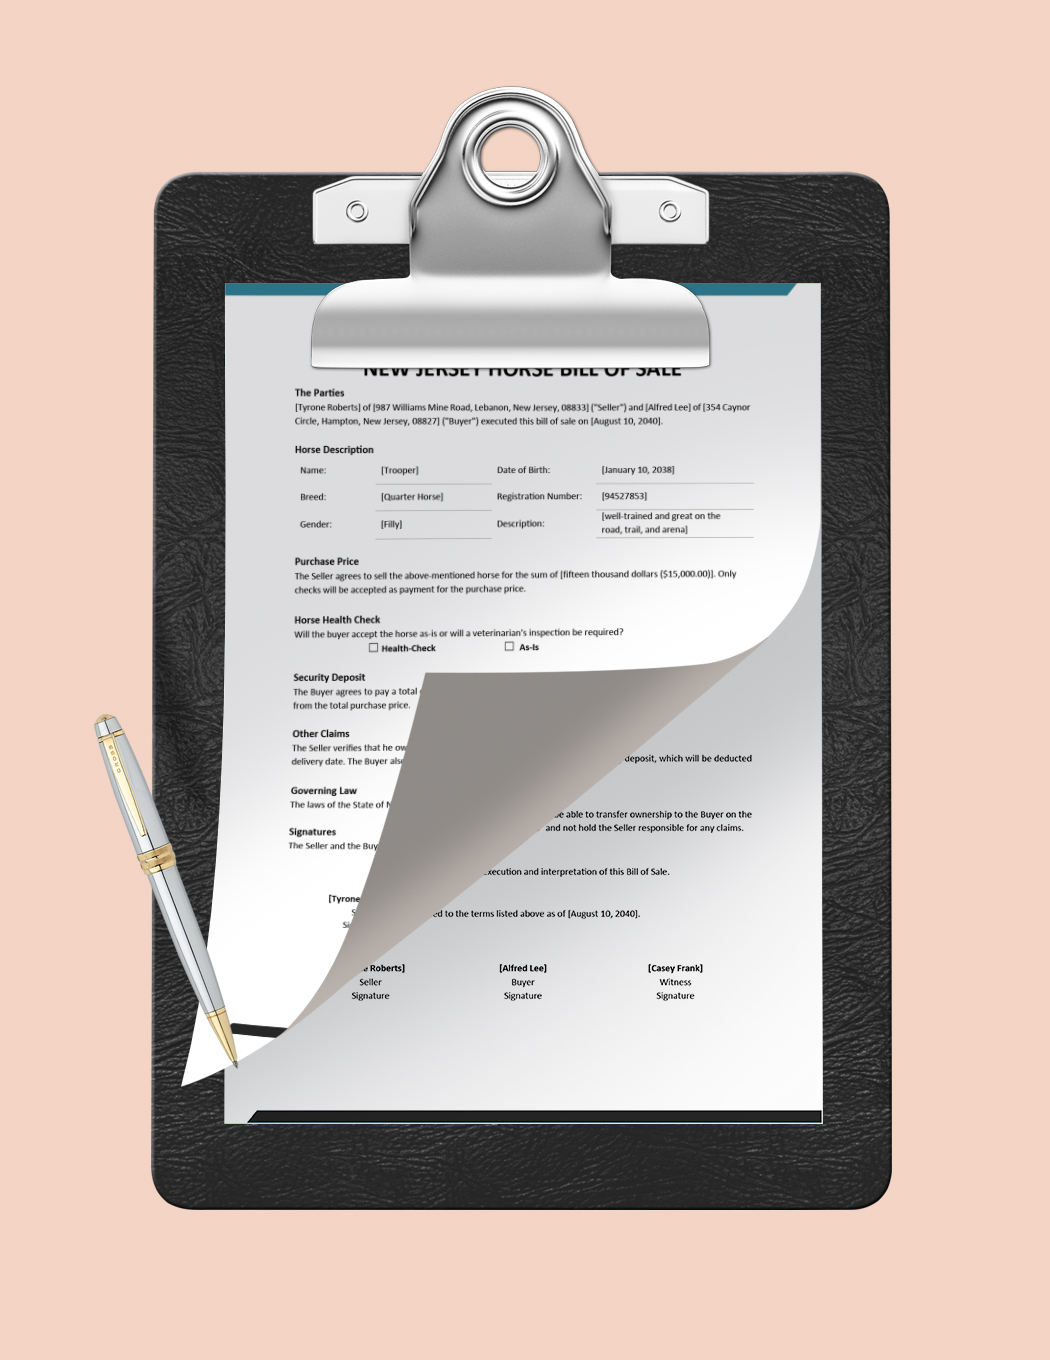 New Jersey Horse Bill of Sale Template